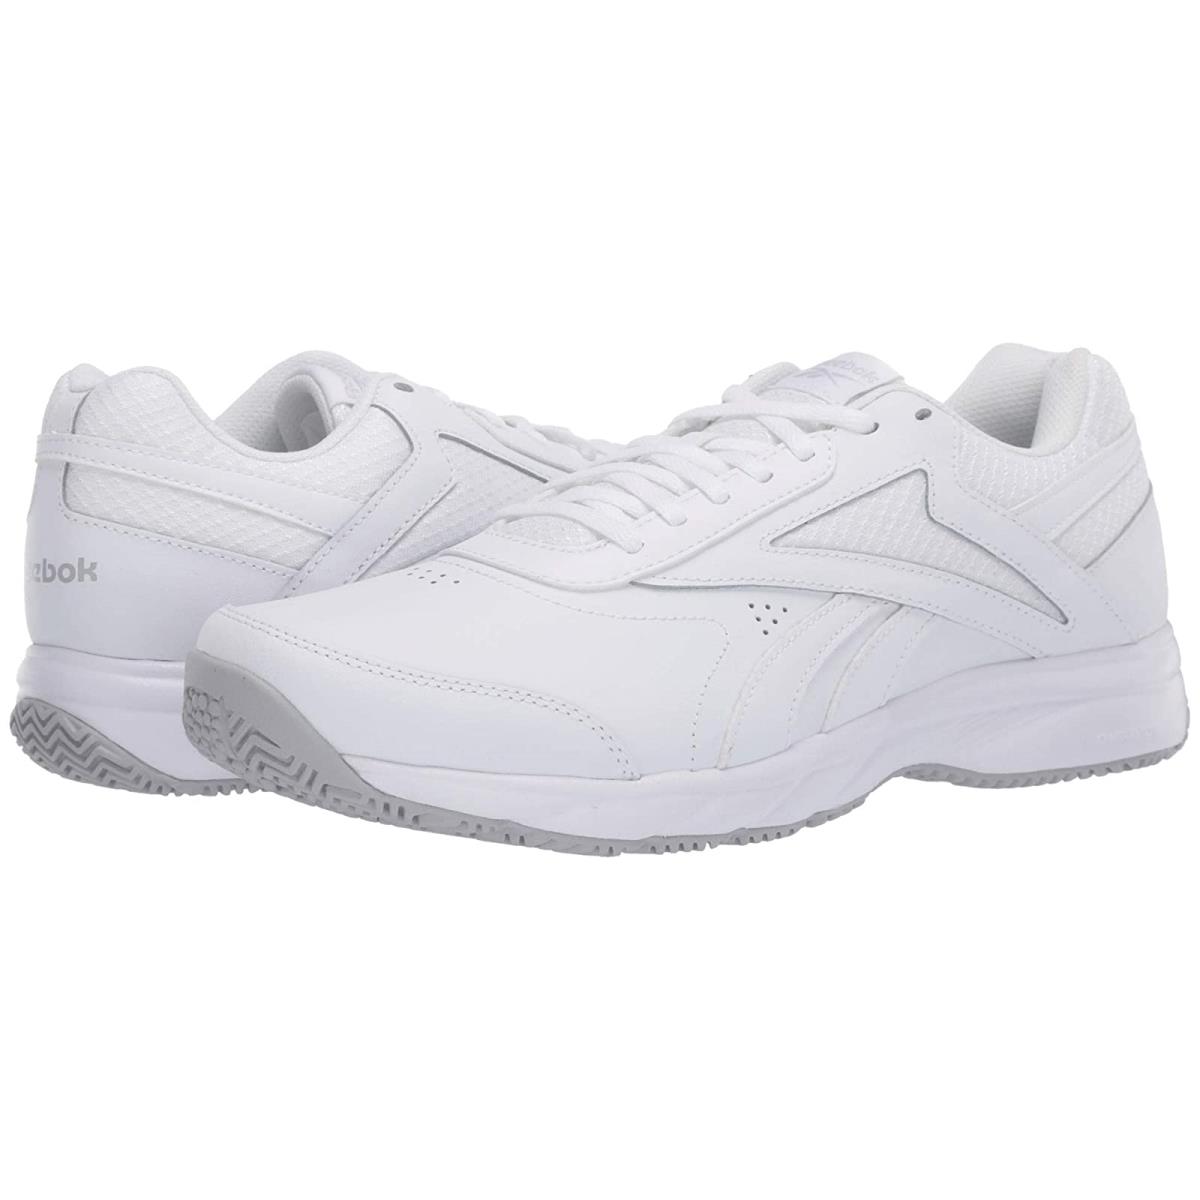 Man`s Sneakers Athletic Shoes Reebok Work N Cushion 4.0 White/Cold Grey/White